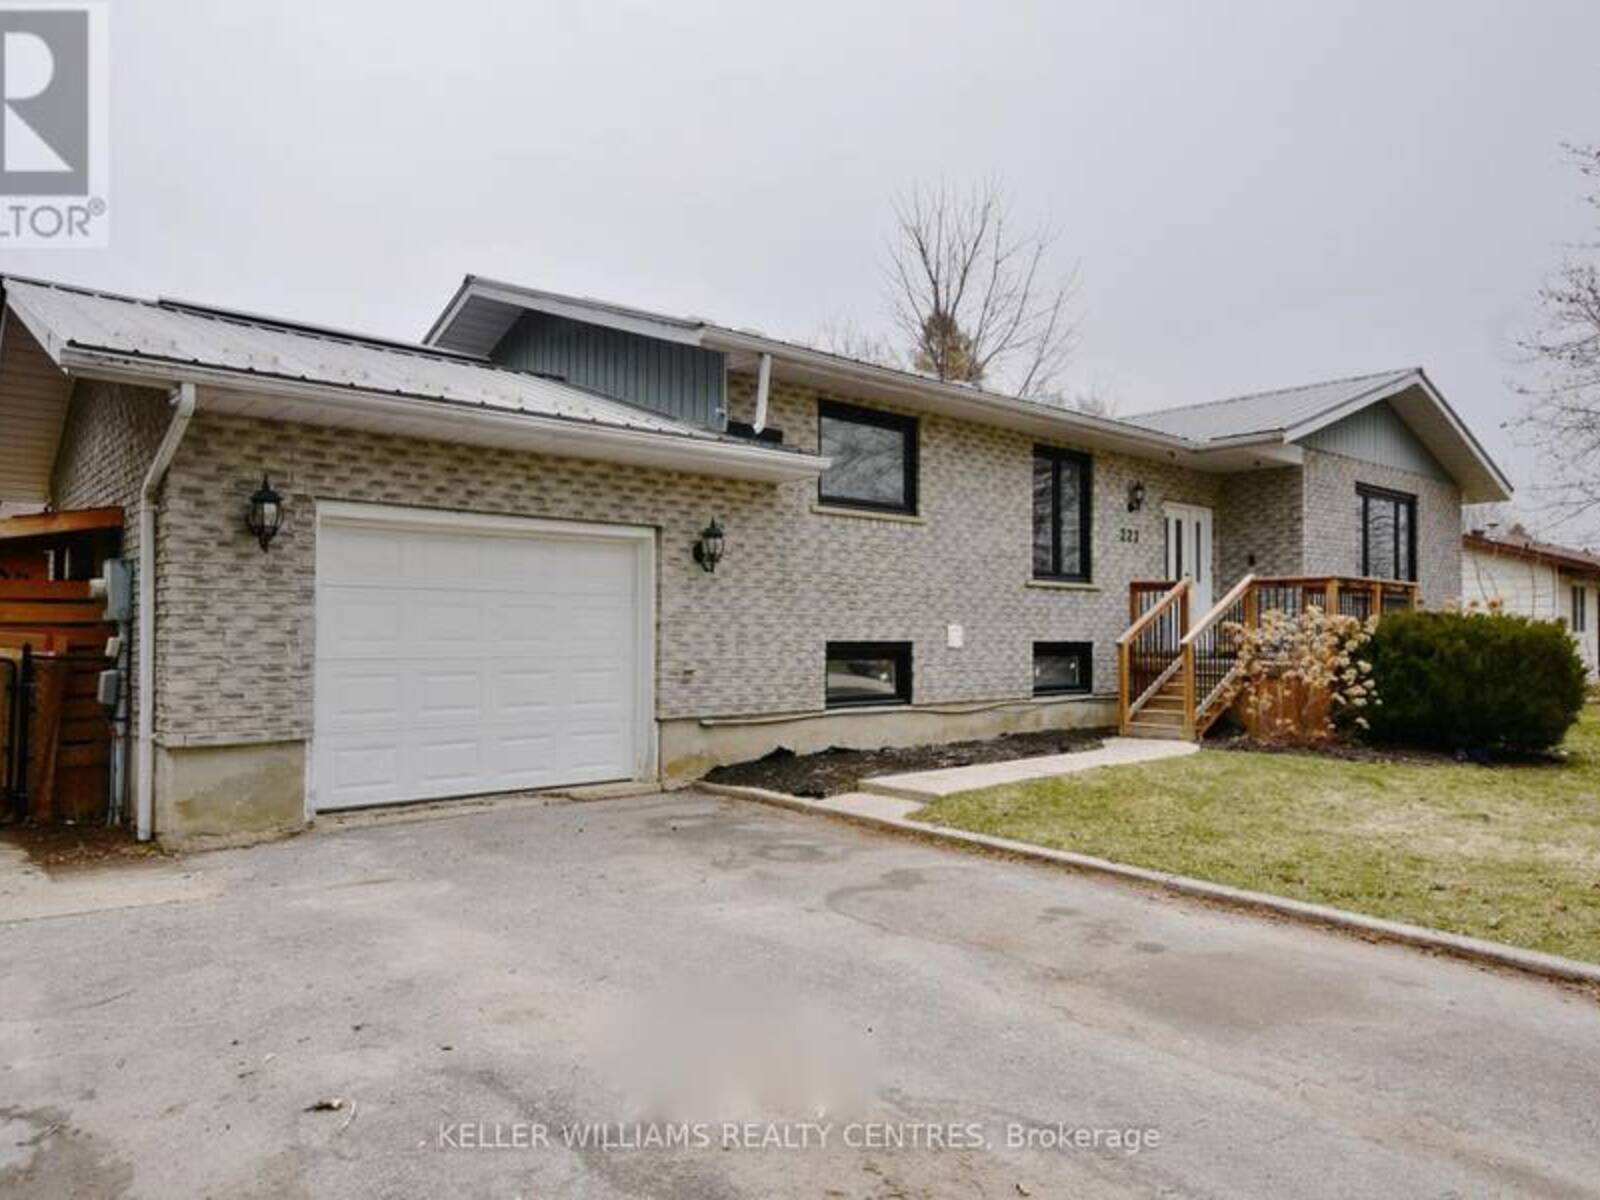 222 CHRISTOPHER STREET ST, Clearview, Ontario L0M 1S0